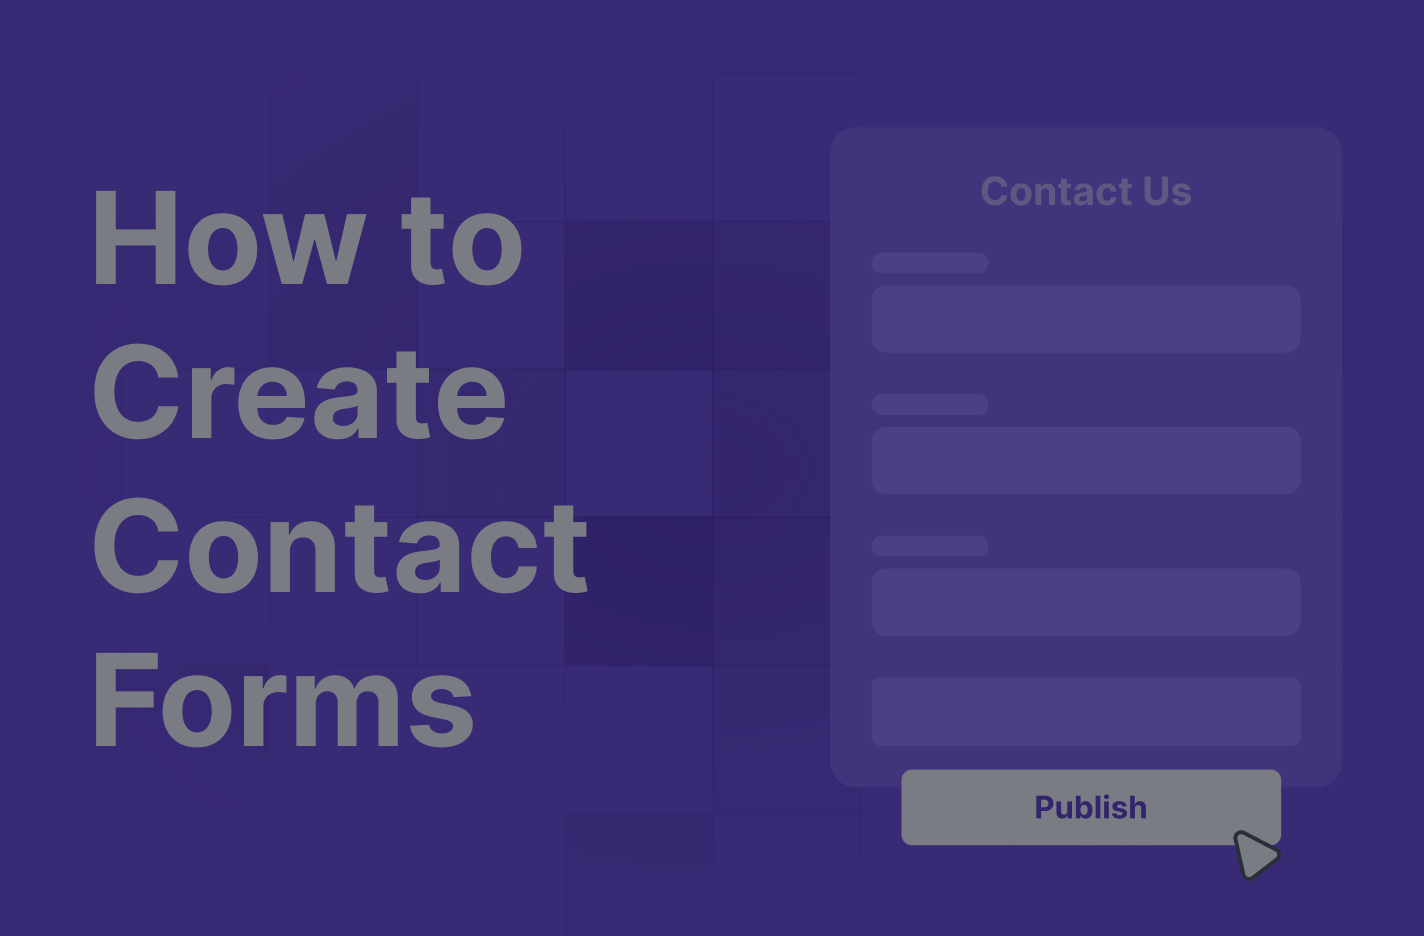 Create Contact Forms